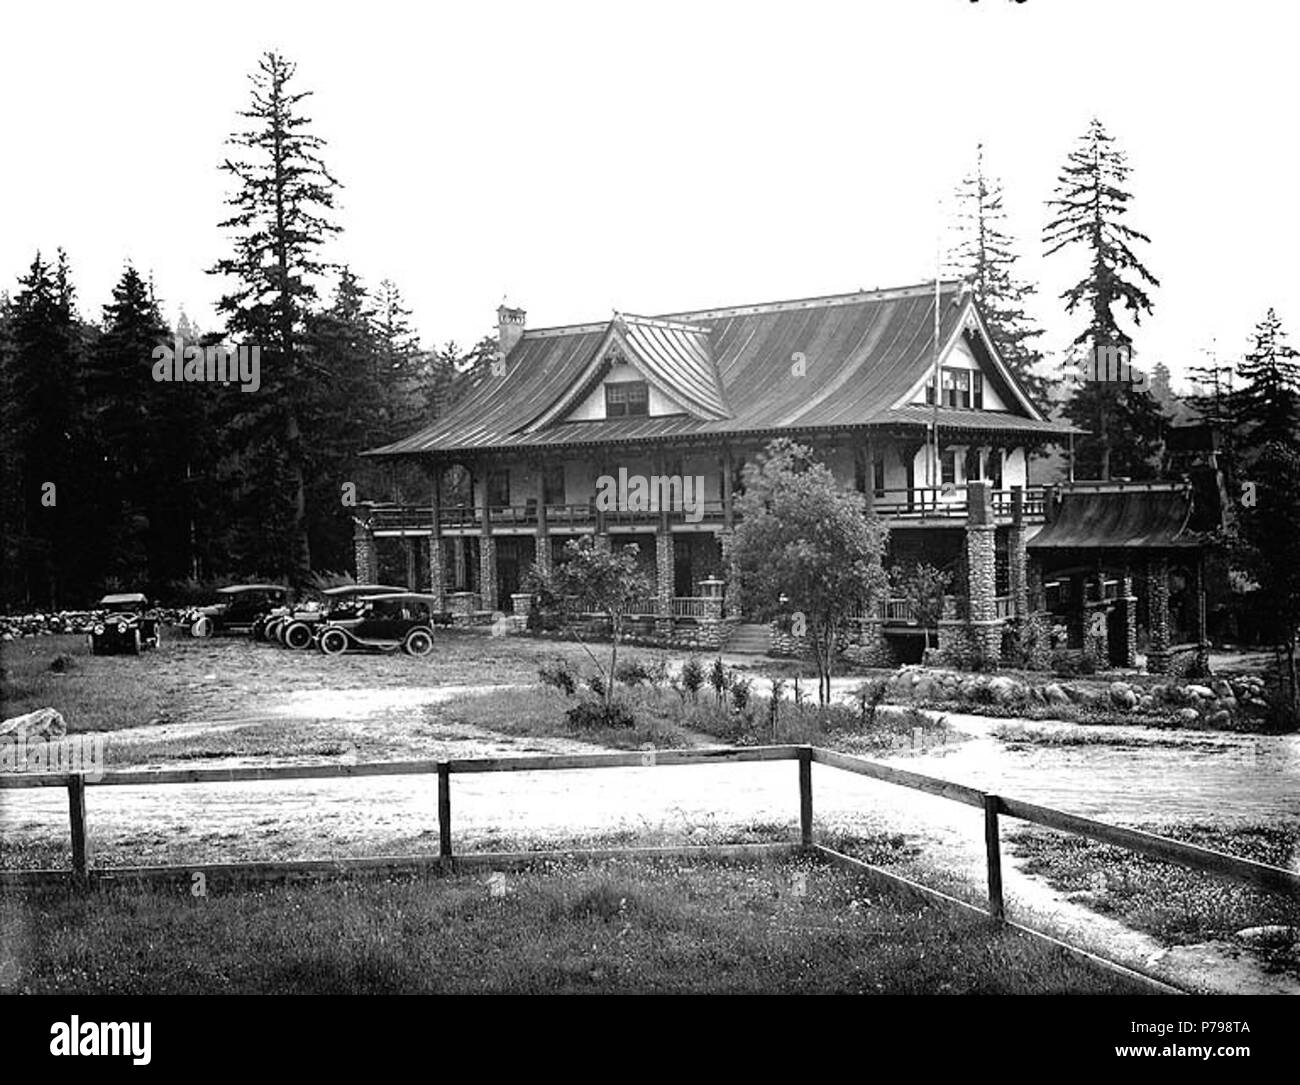 . English: Canyada Hotel, LaGrande, Washington., ca. 1916 . English: Later called the Canyada Lodge . View of hotel with automobiles parked in front . On sleeve of negative: La Grande. Canyada Inn. Autos. Subjects (LCTGM): Hotels--Washington (State)--LaGrande; Automobiles--Washington (State)--LaGrande Subjects (LCSH): Canyada Lodge (LaGrande, Wash,); LaGrande (Wash.)--Buildings, structures, etc.  . circa 1916 12 Canyada Hotel, LaGrande, Washington, ca 1916 (BAR 65) Stock Photo